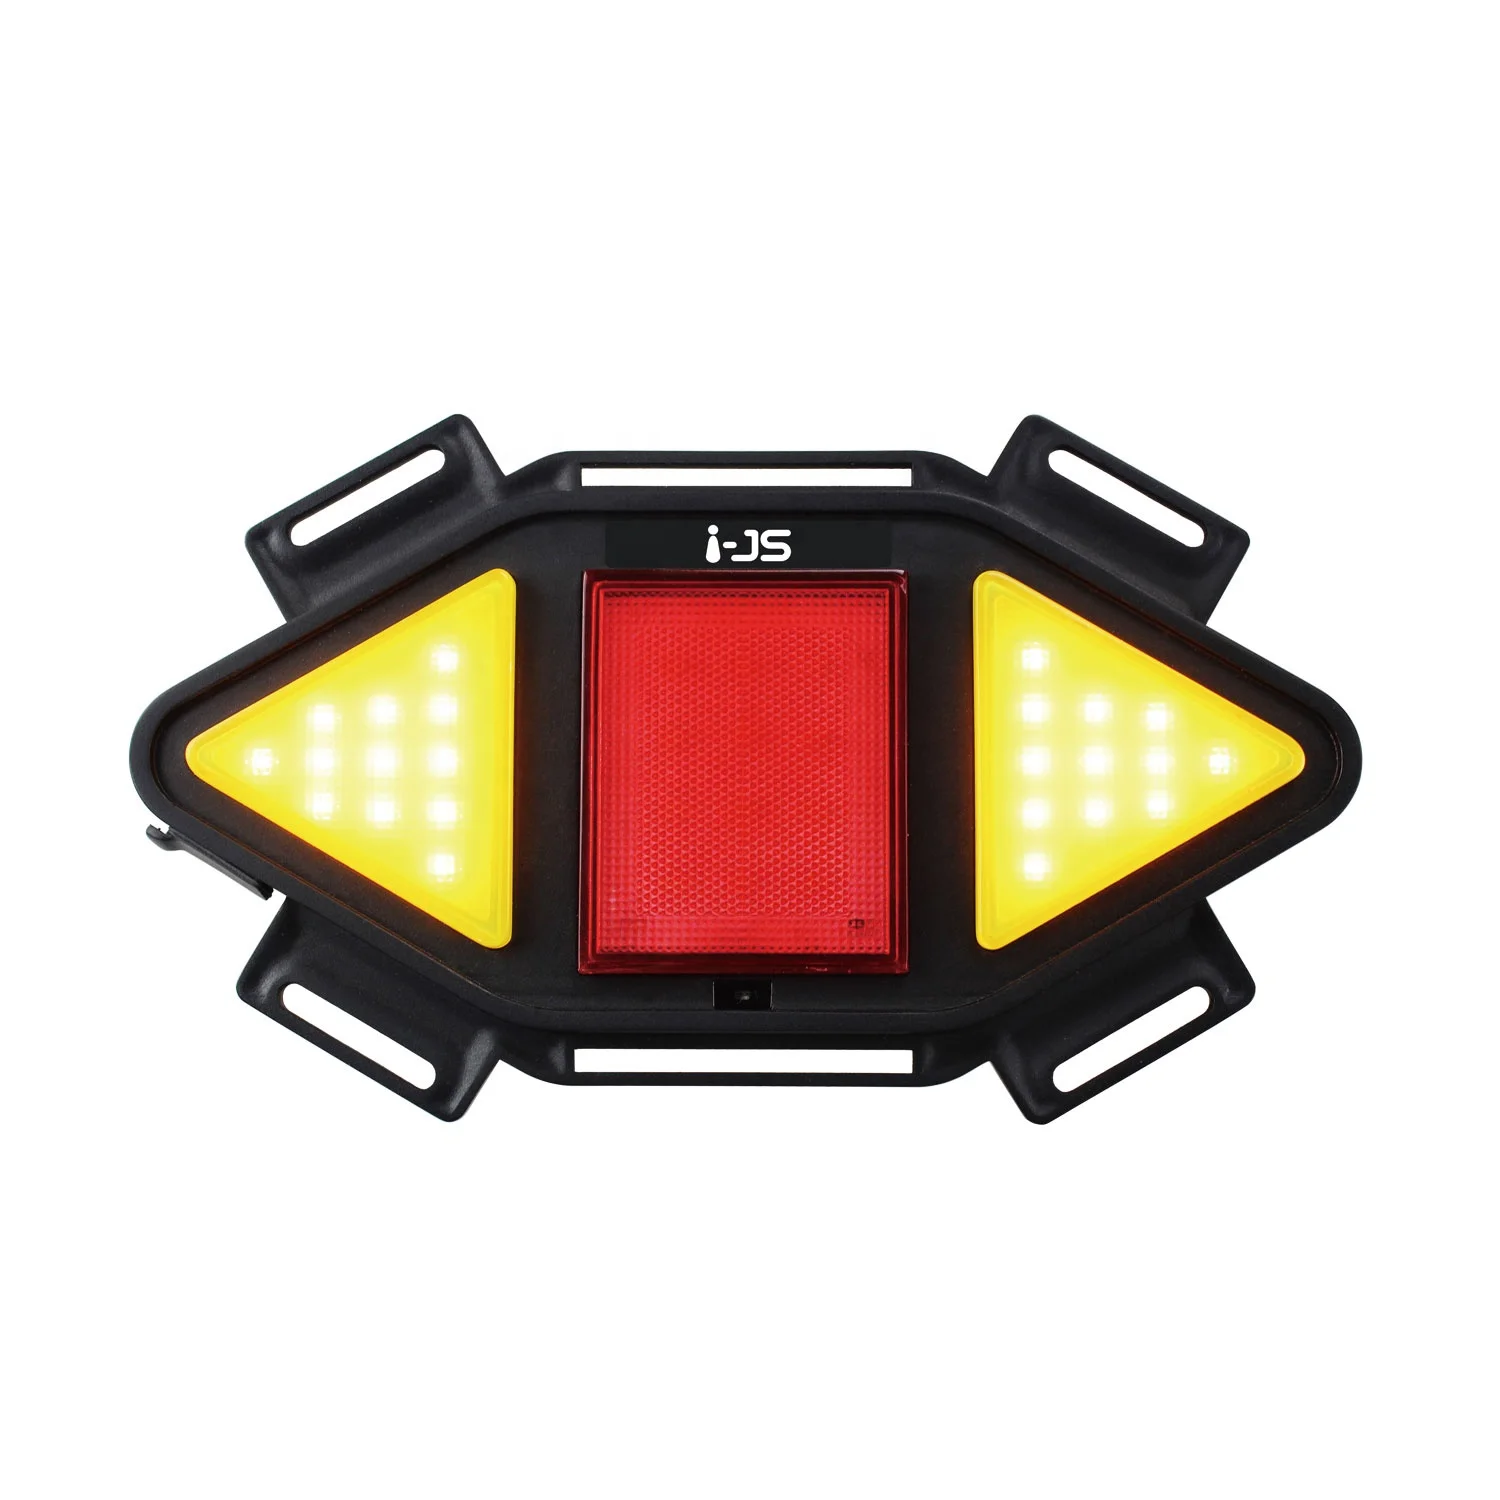 IJS7-Scoot Light Series LED Taillight USB Rechargeable Battery for Bicycle light